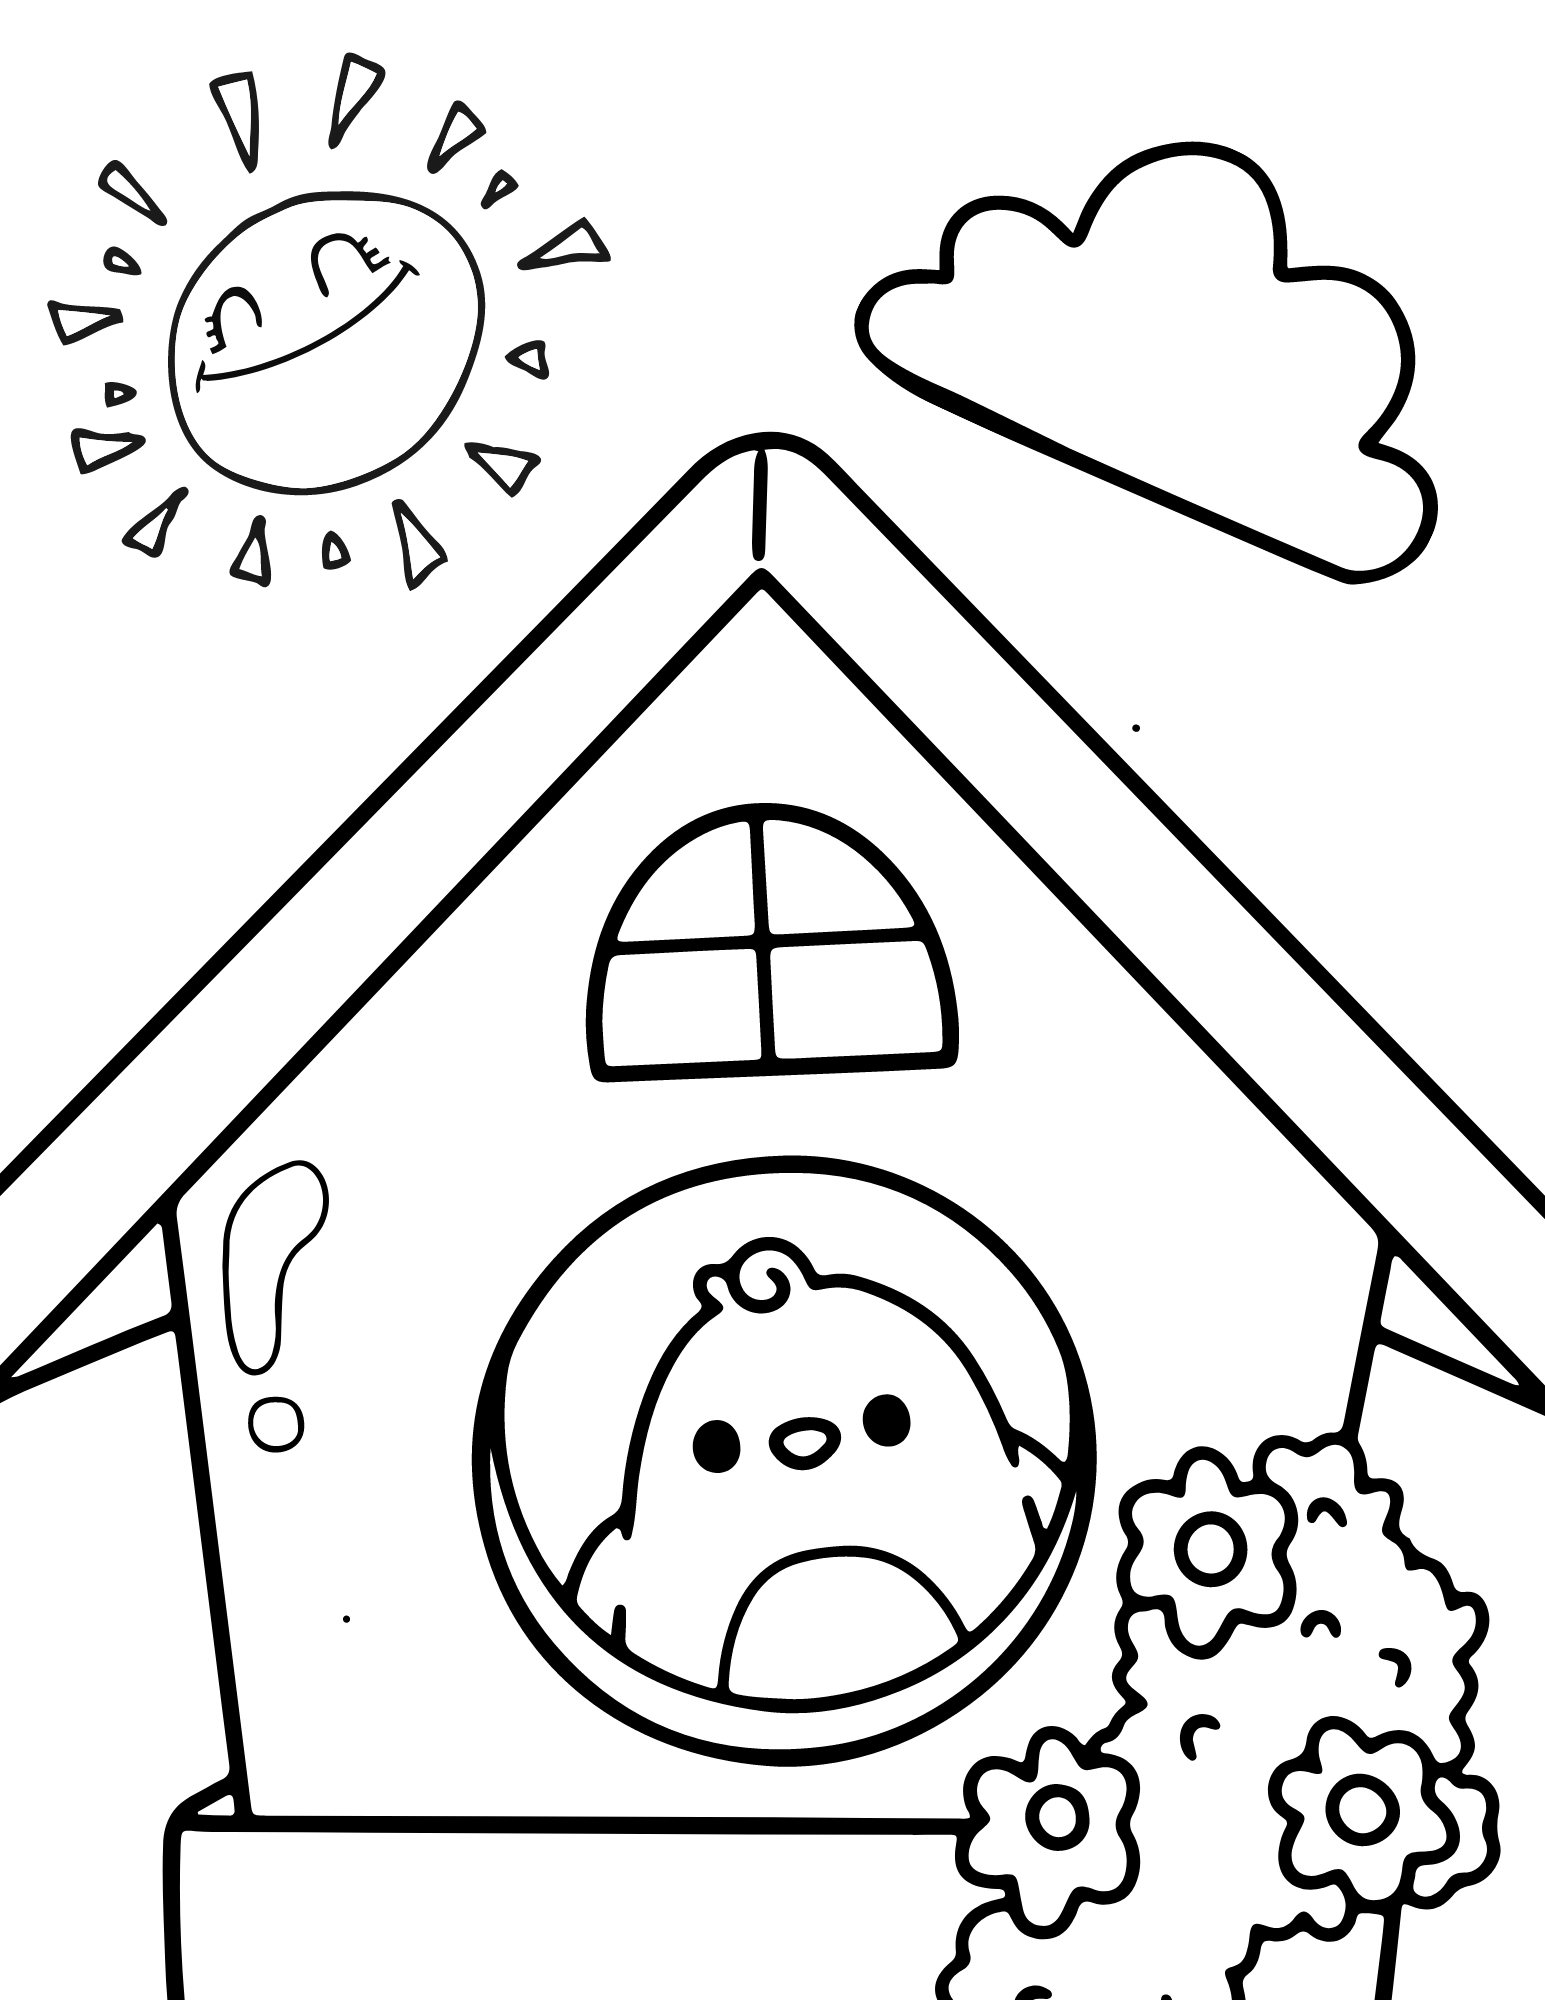 Cute spring coloring pages for kids and adults